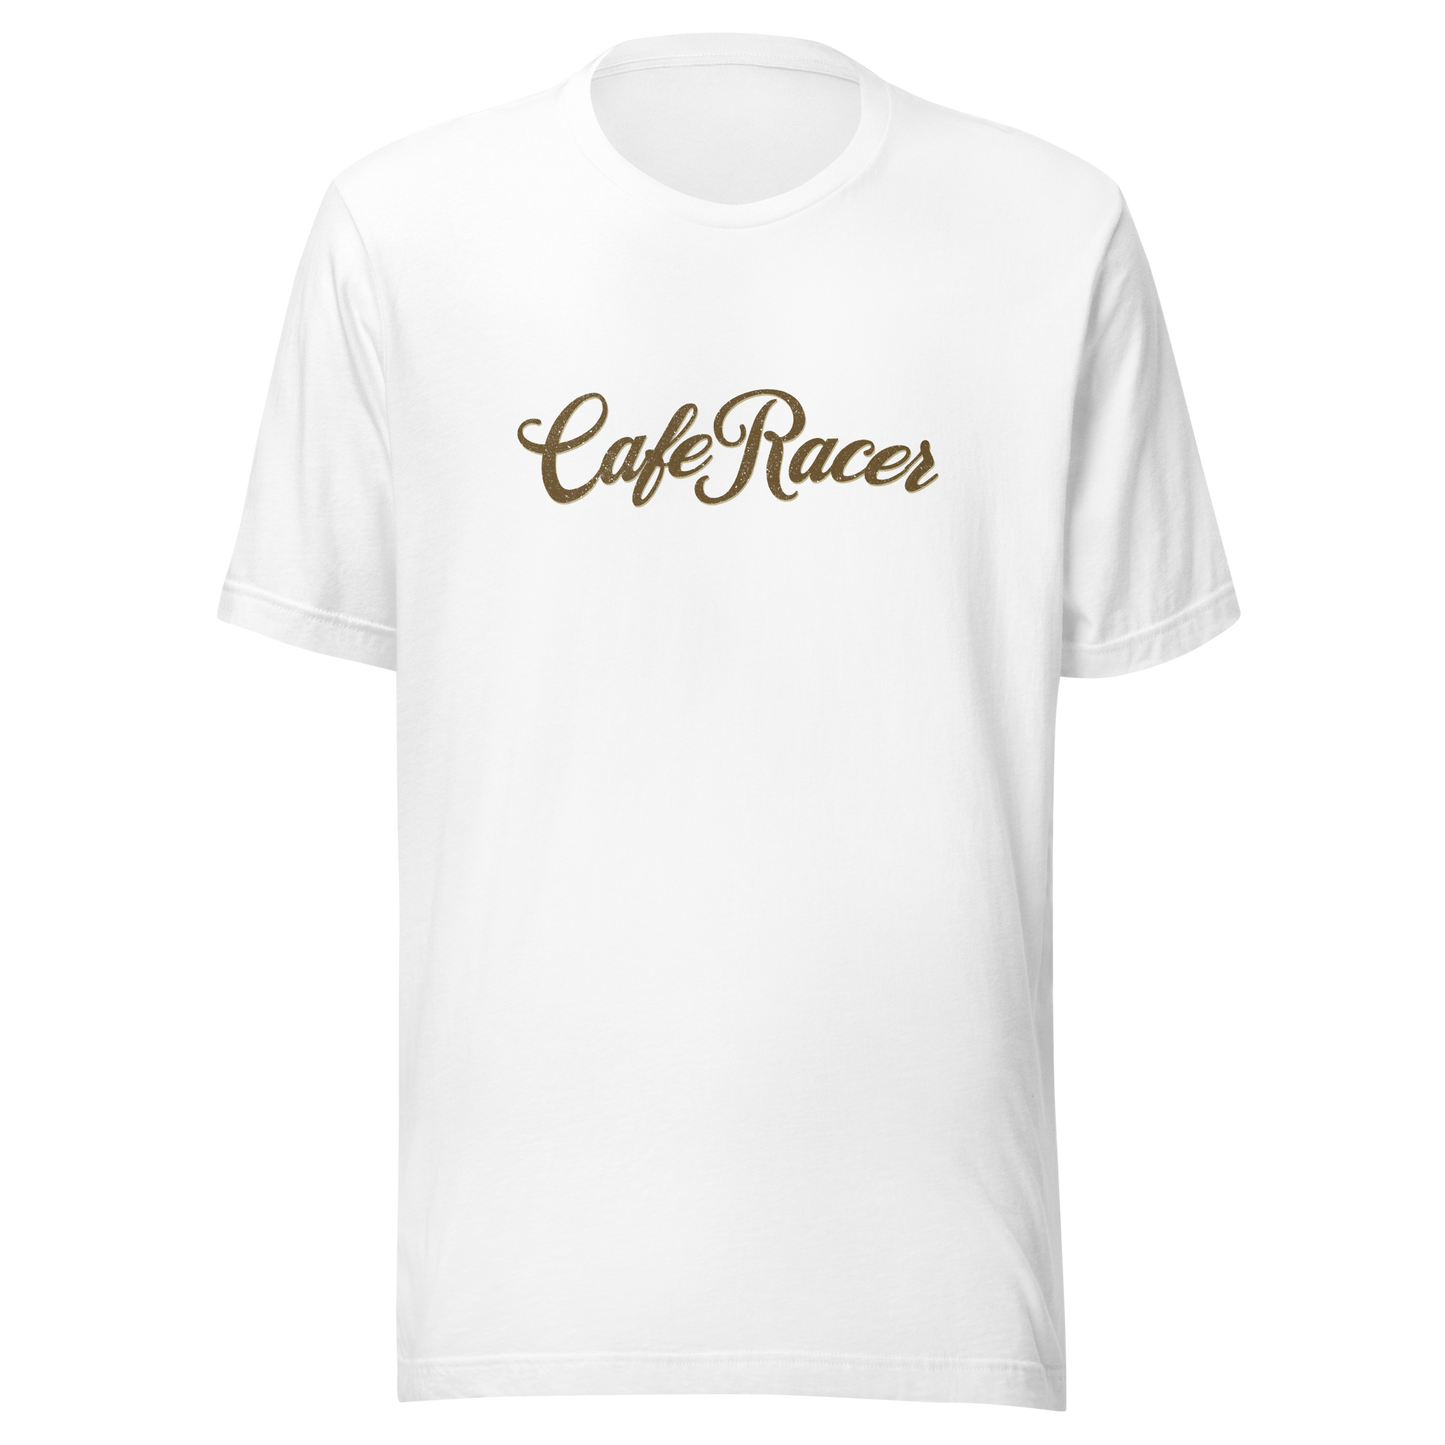 Cafe Racer t-shirt Motorcycle Shirt Cafe Racer Shirt Funny Biker Shirt Motorcycle Gift for Husband from Wife Sportbike Tee Moto Shirt Bobber